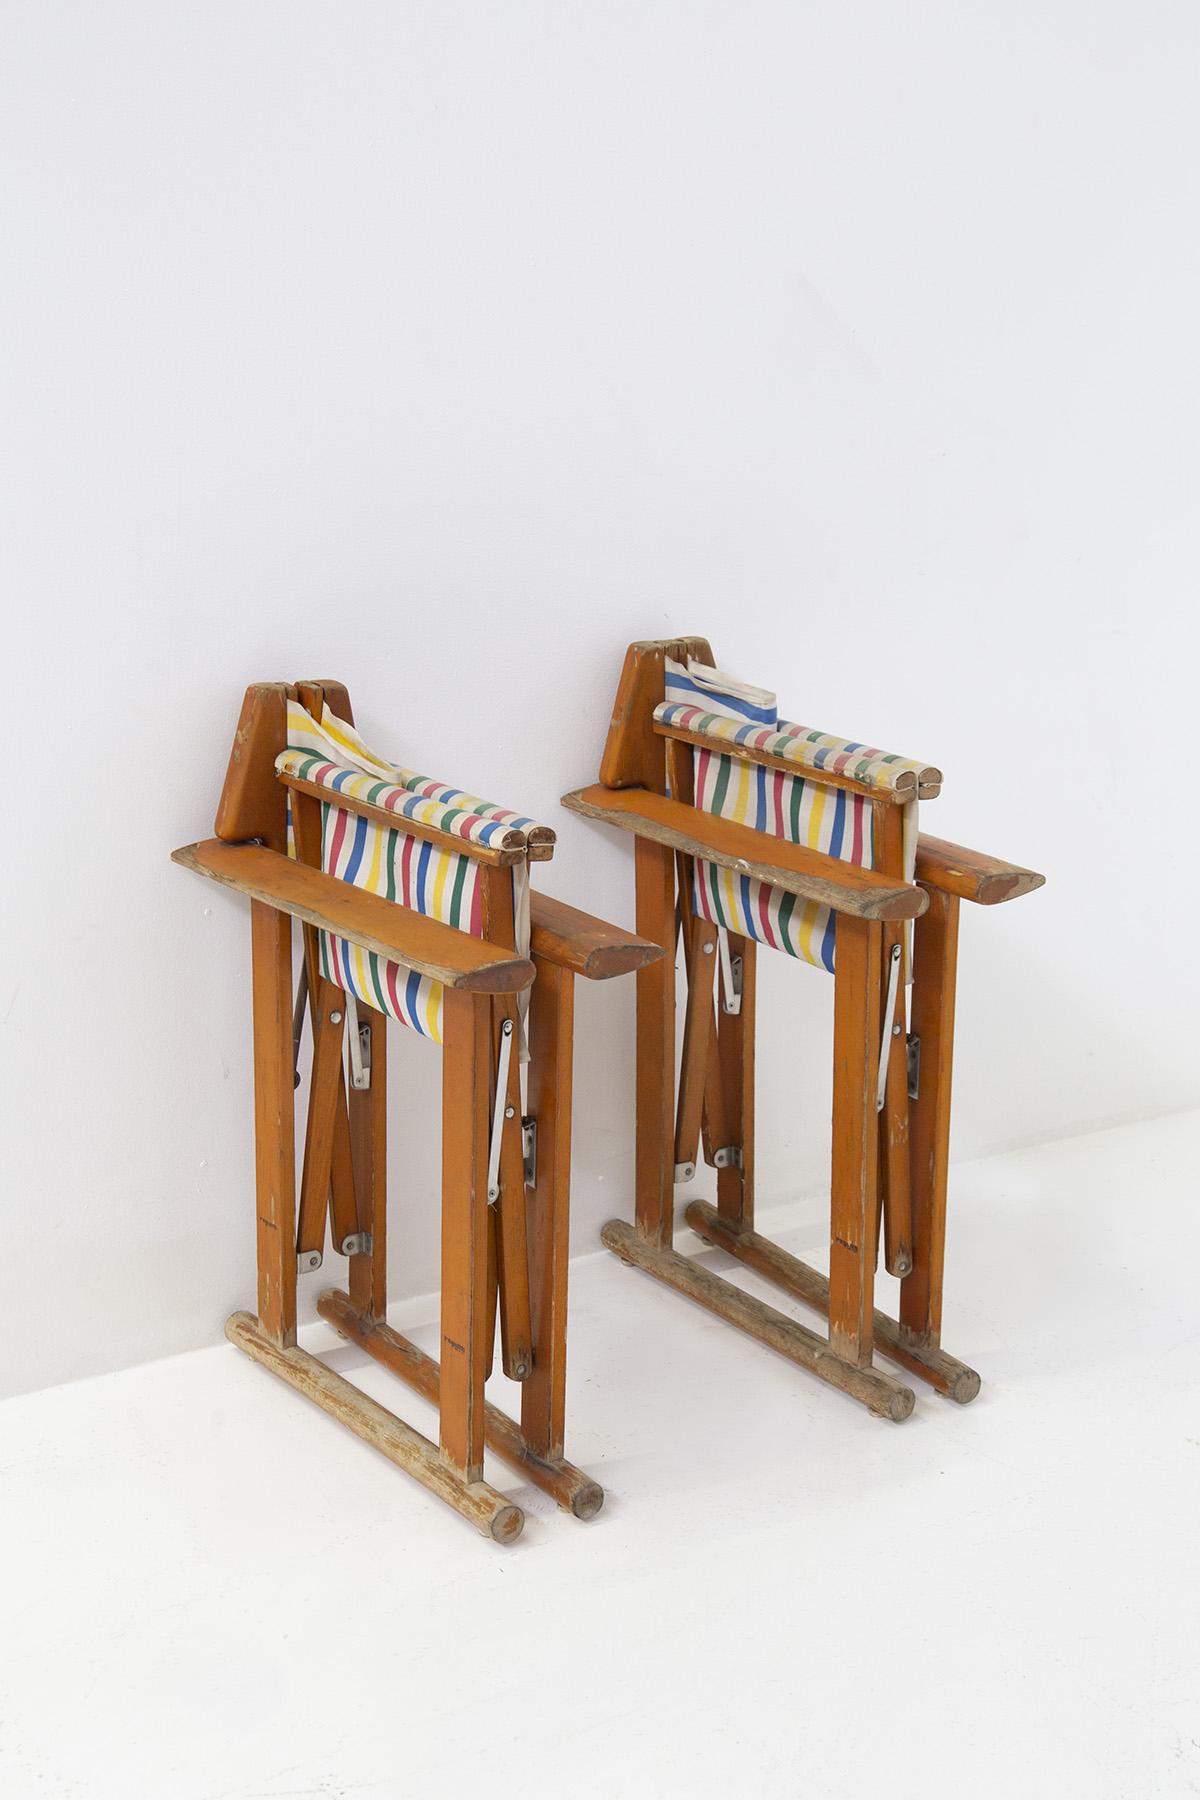 Gorgeous Regguiti-branded folding Safari armchairs from the 1970s, Italian manufacture.
The chairs are made in the wooden frame, the legs are 4, which join on the floor in a cylindrical wooden slat, in original patina, a sight.
In the middle of